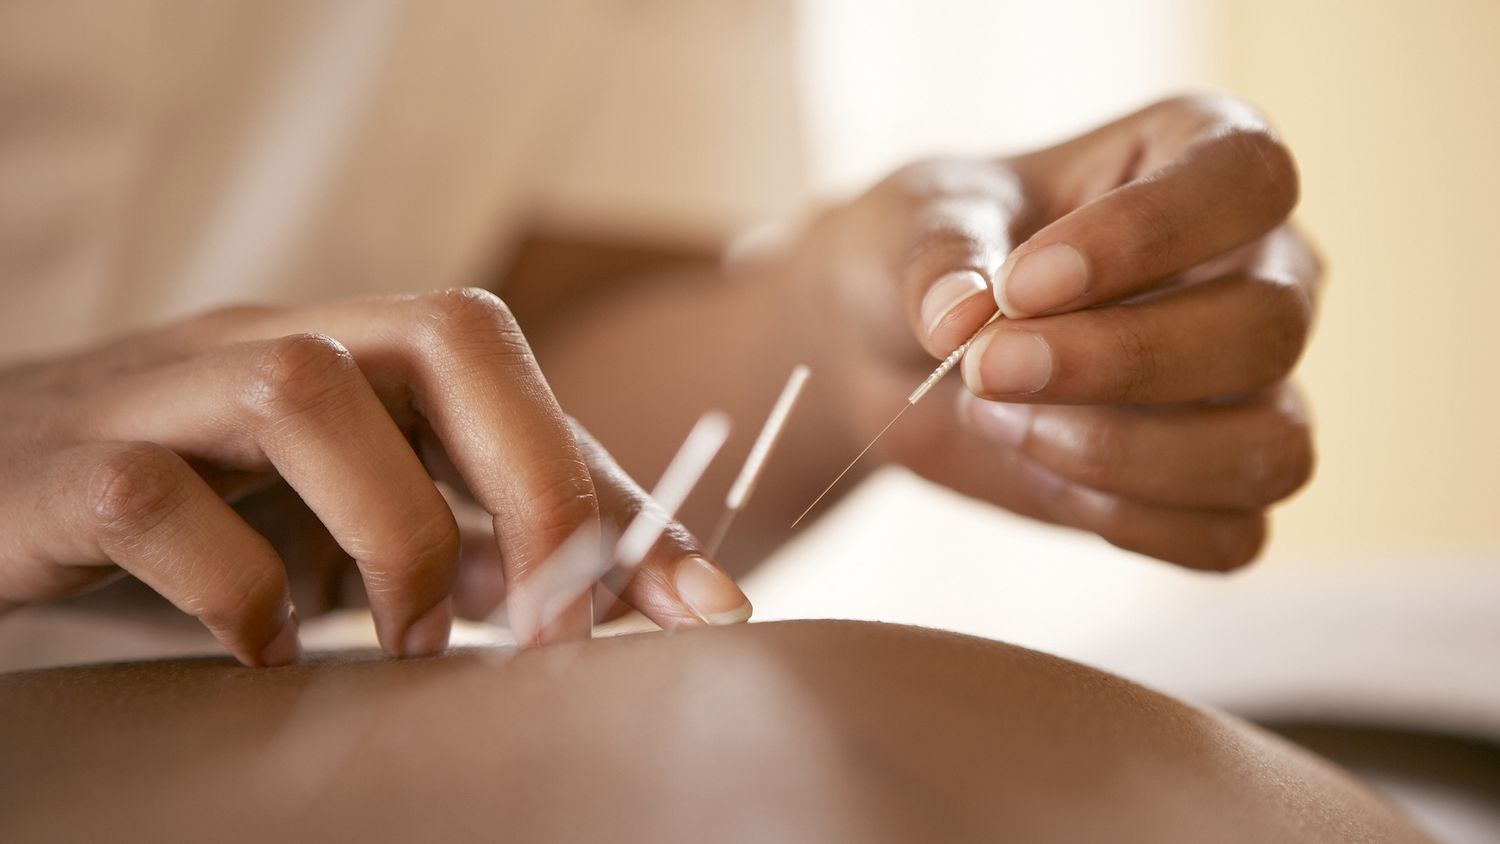 What to Know Before Choosing an Acupuncture Clinic